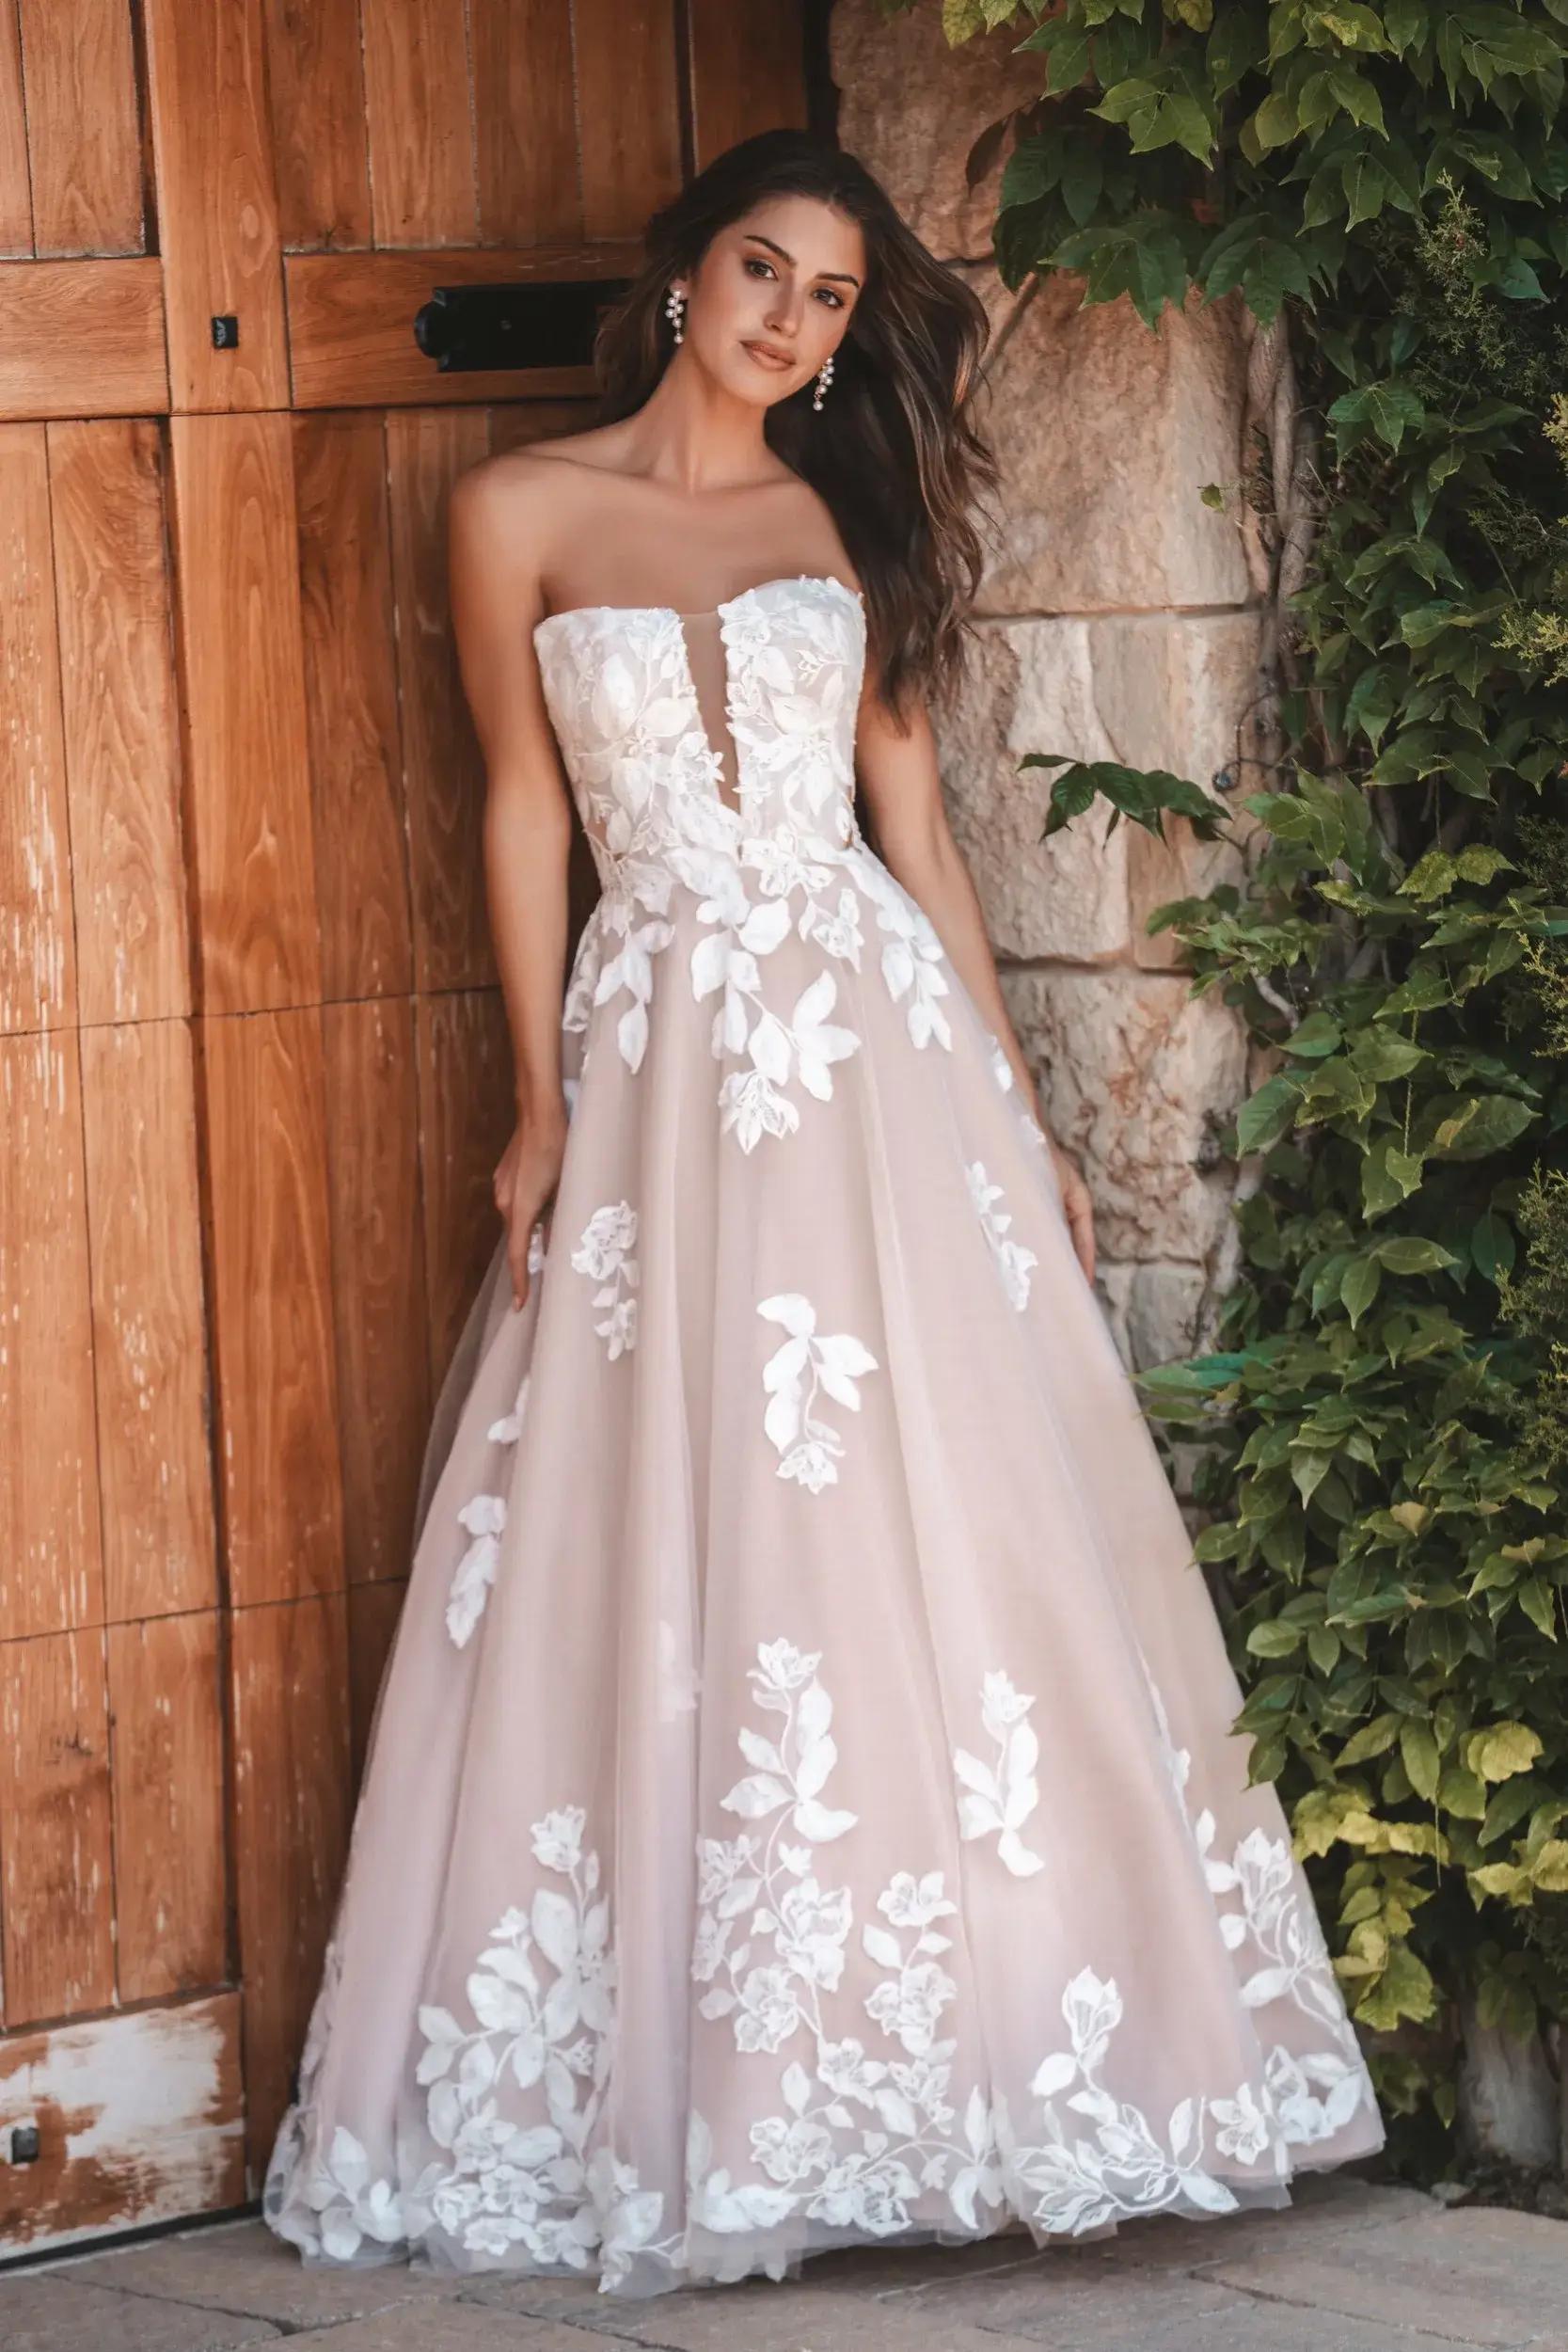 Model wearing an Allure Bridals gown